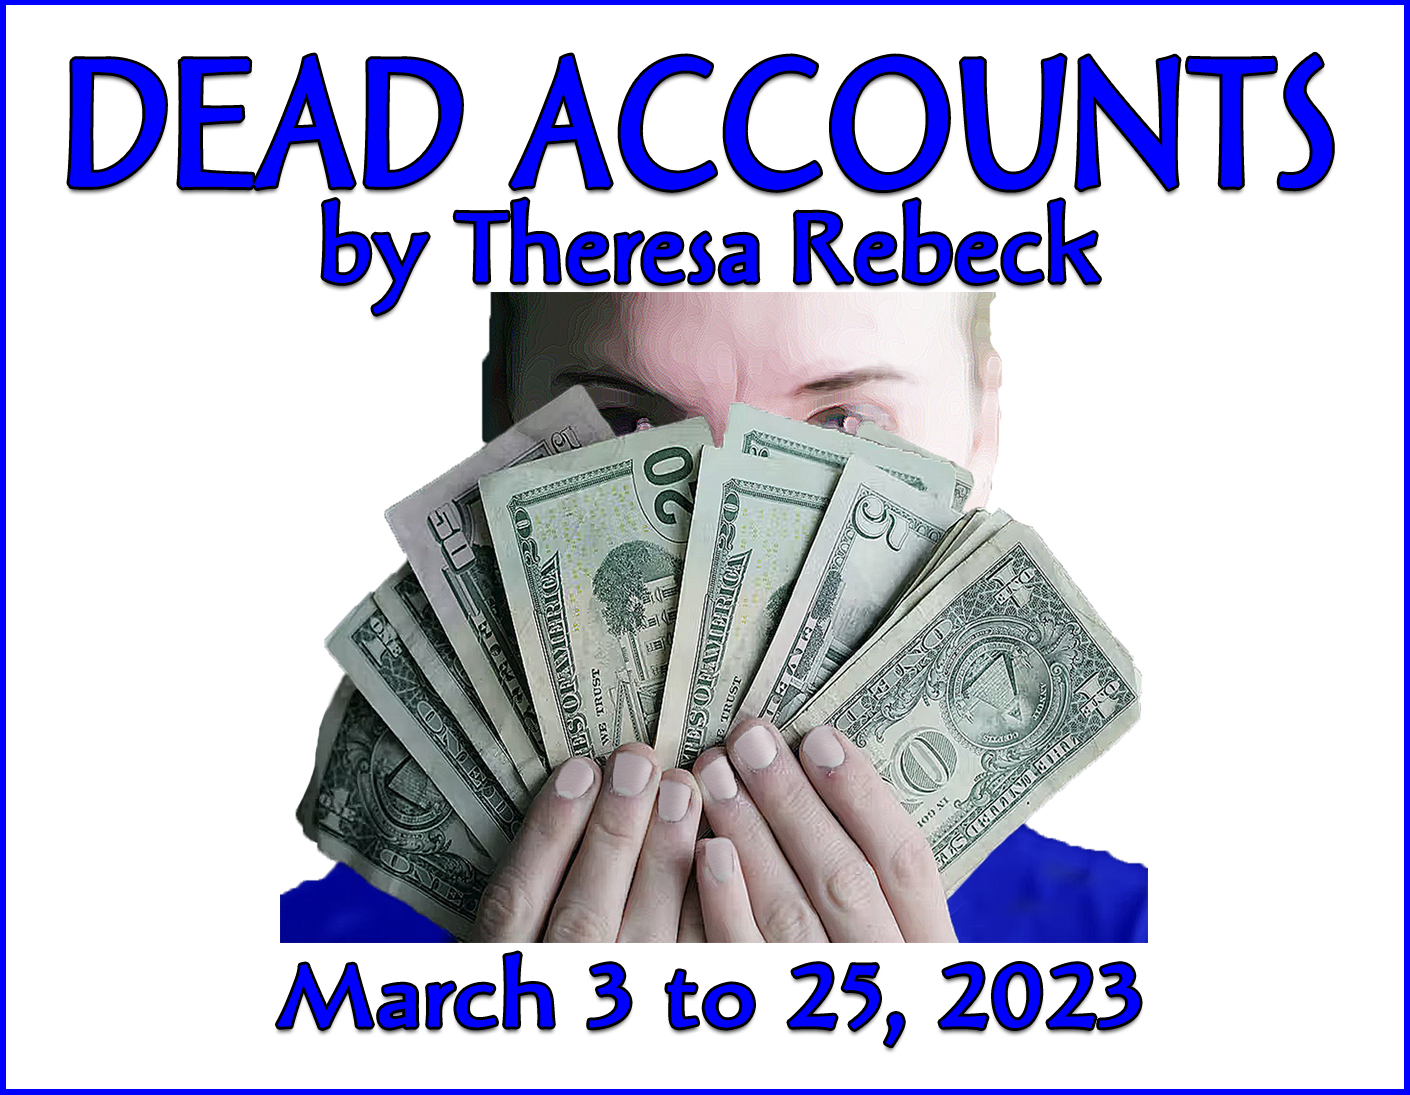 "Village Players" "Bloor West Village Players" "Village Playhouse" "Runnymede theatre" theatre theater "community theatre" "Dead Accounts" "Theresa Rebeck" "Cliona Kenny"